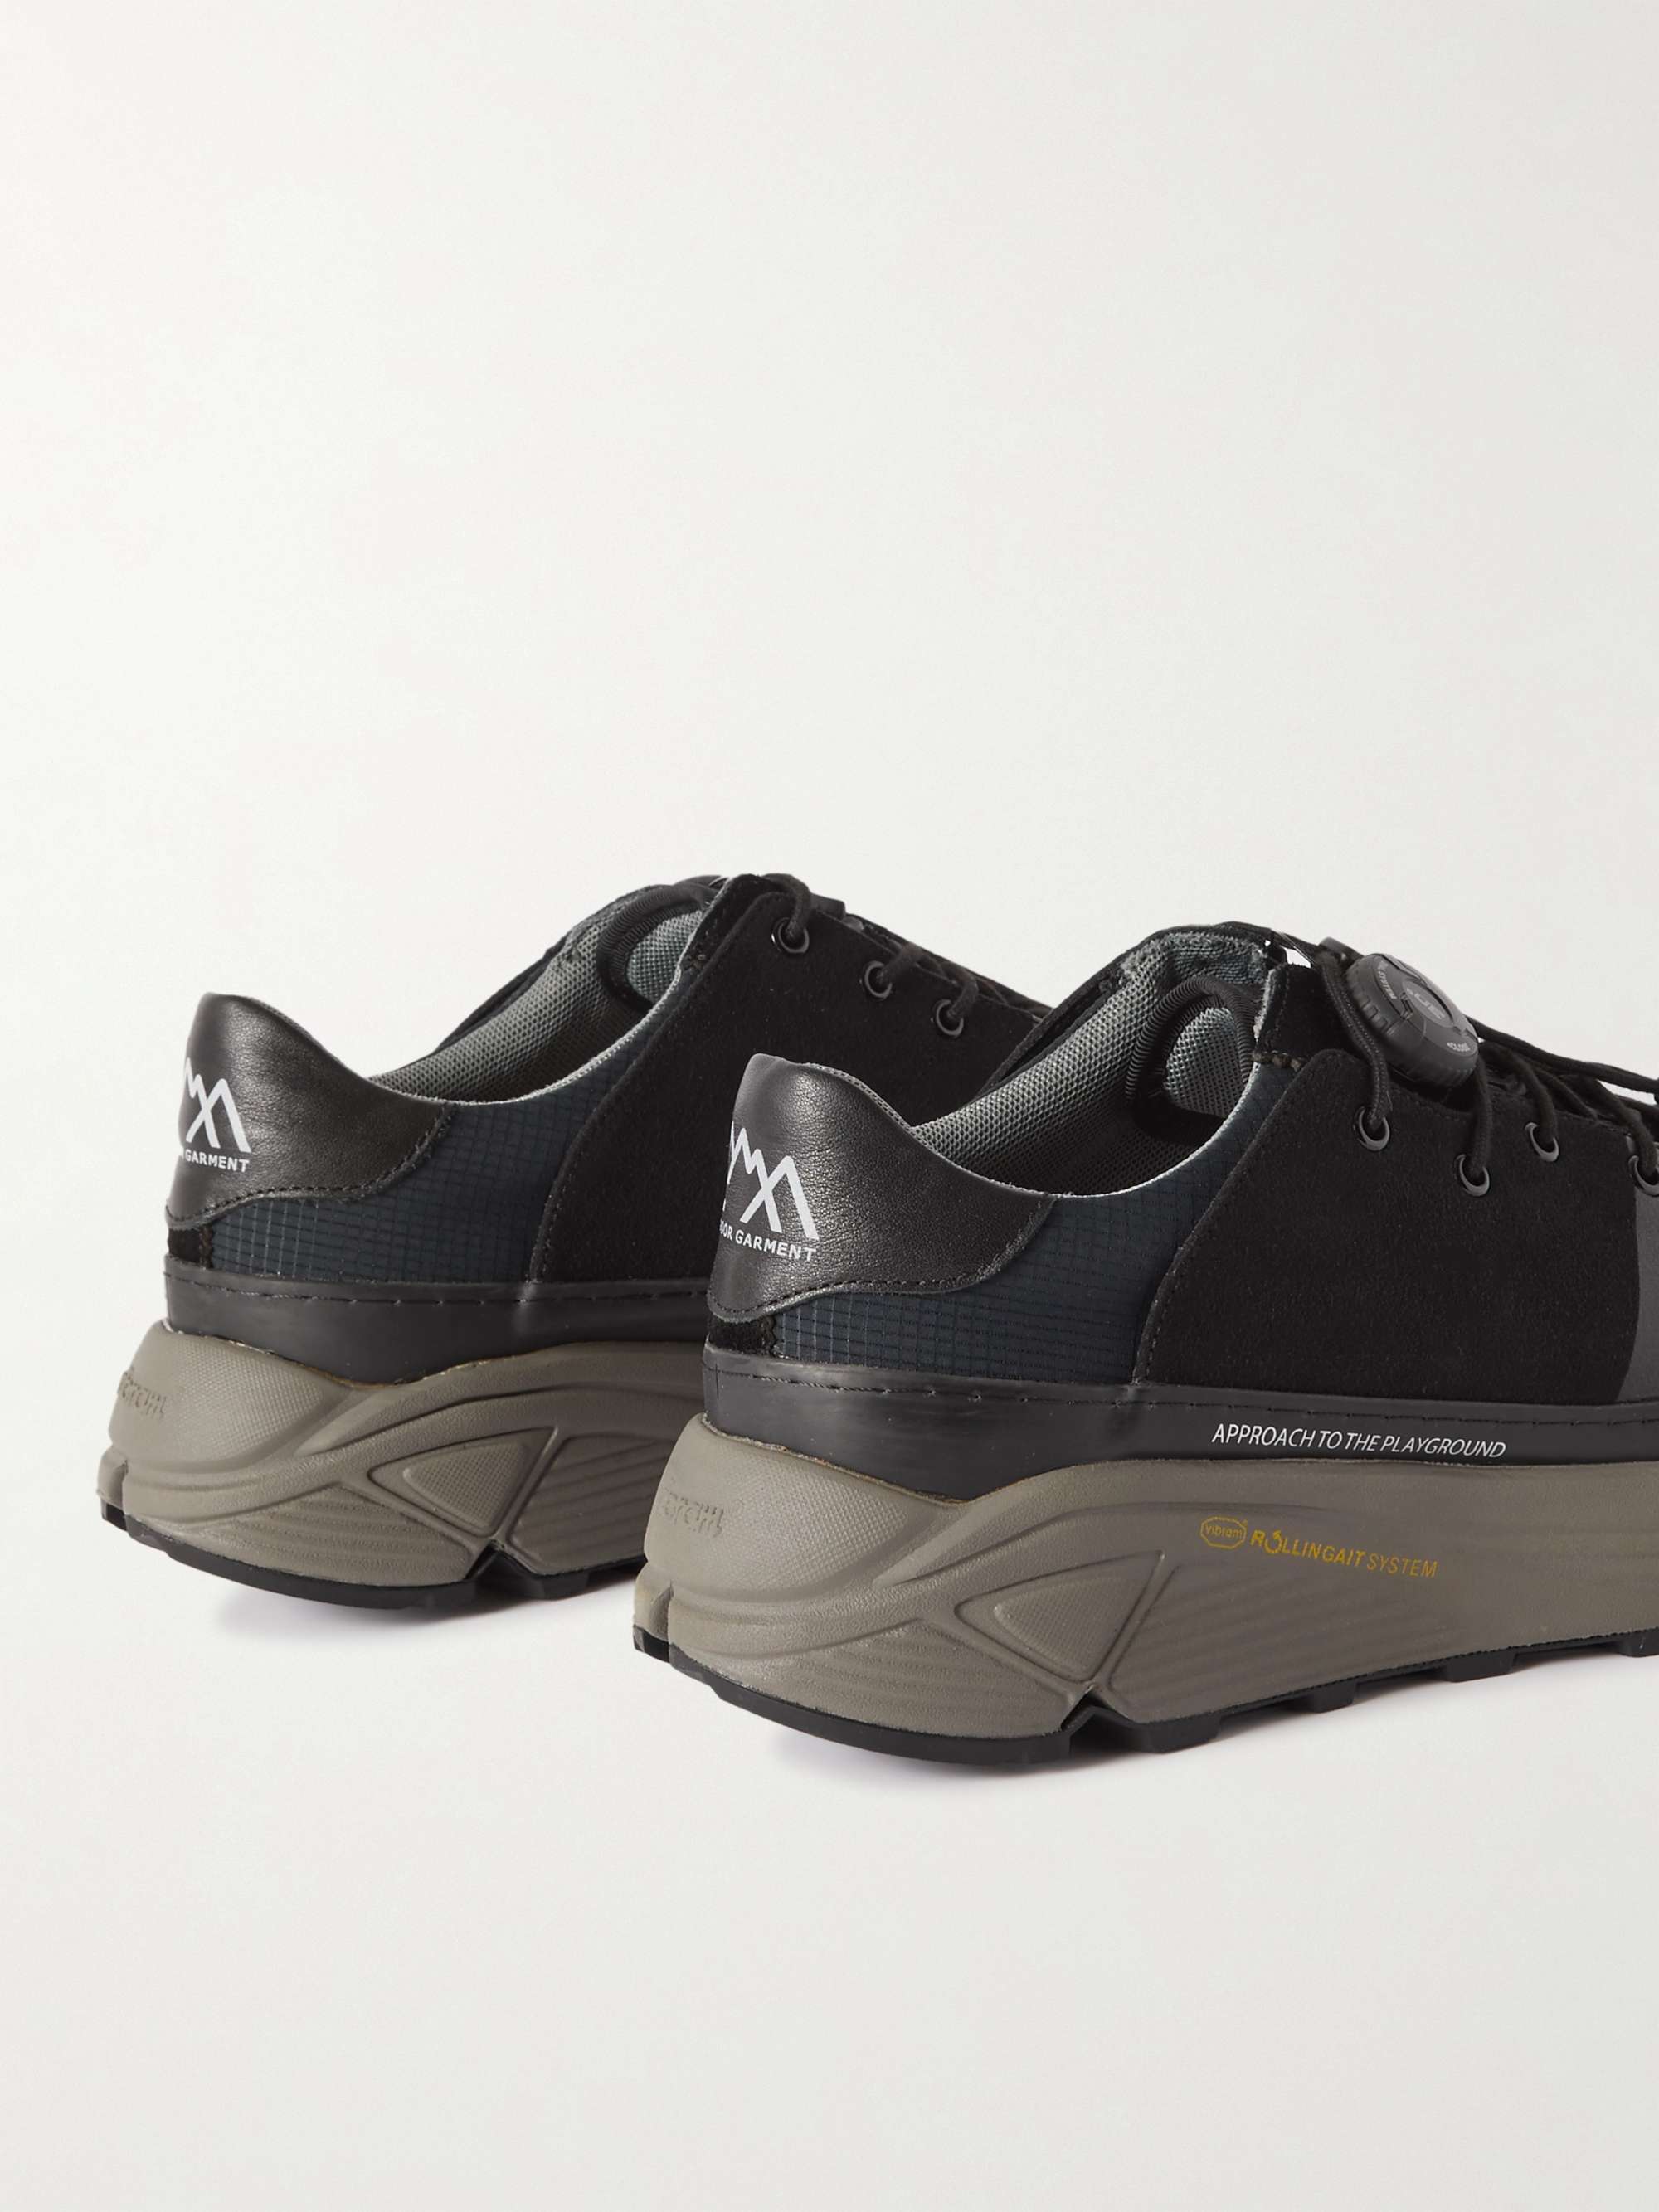 COMFY OUTDOOR GARMENT Approach Mesh and Vegan Leather Sneakers